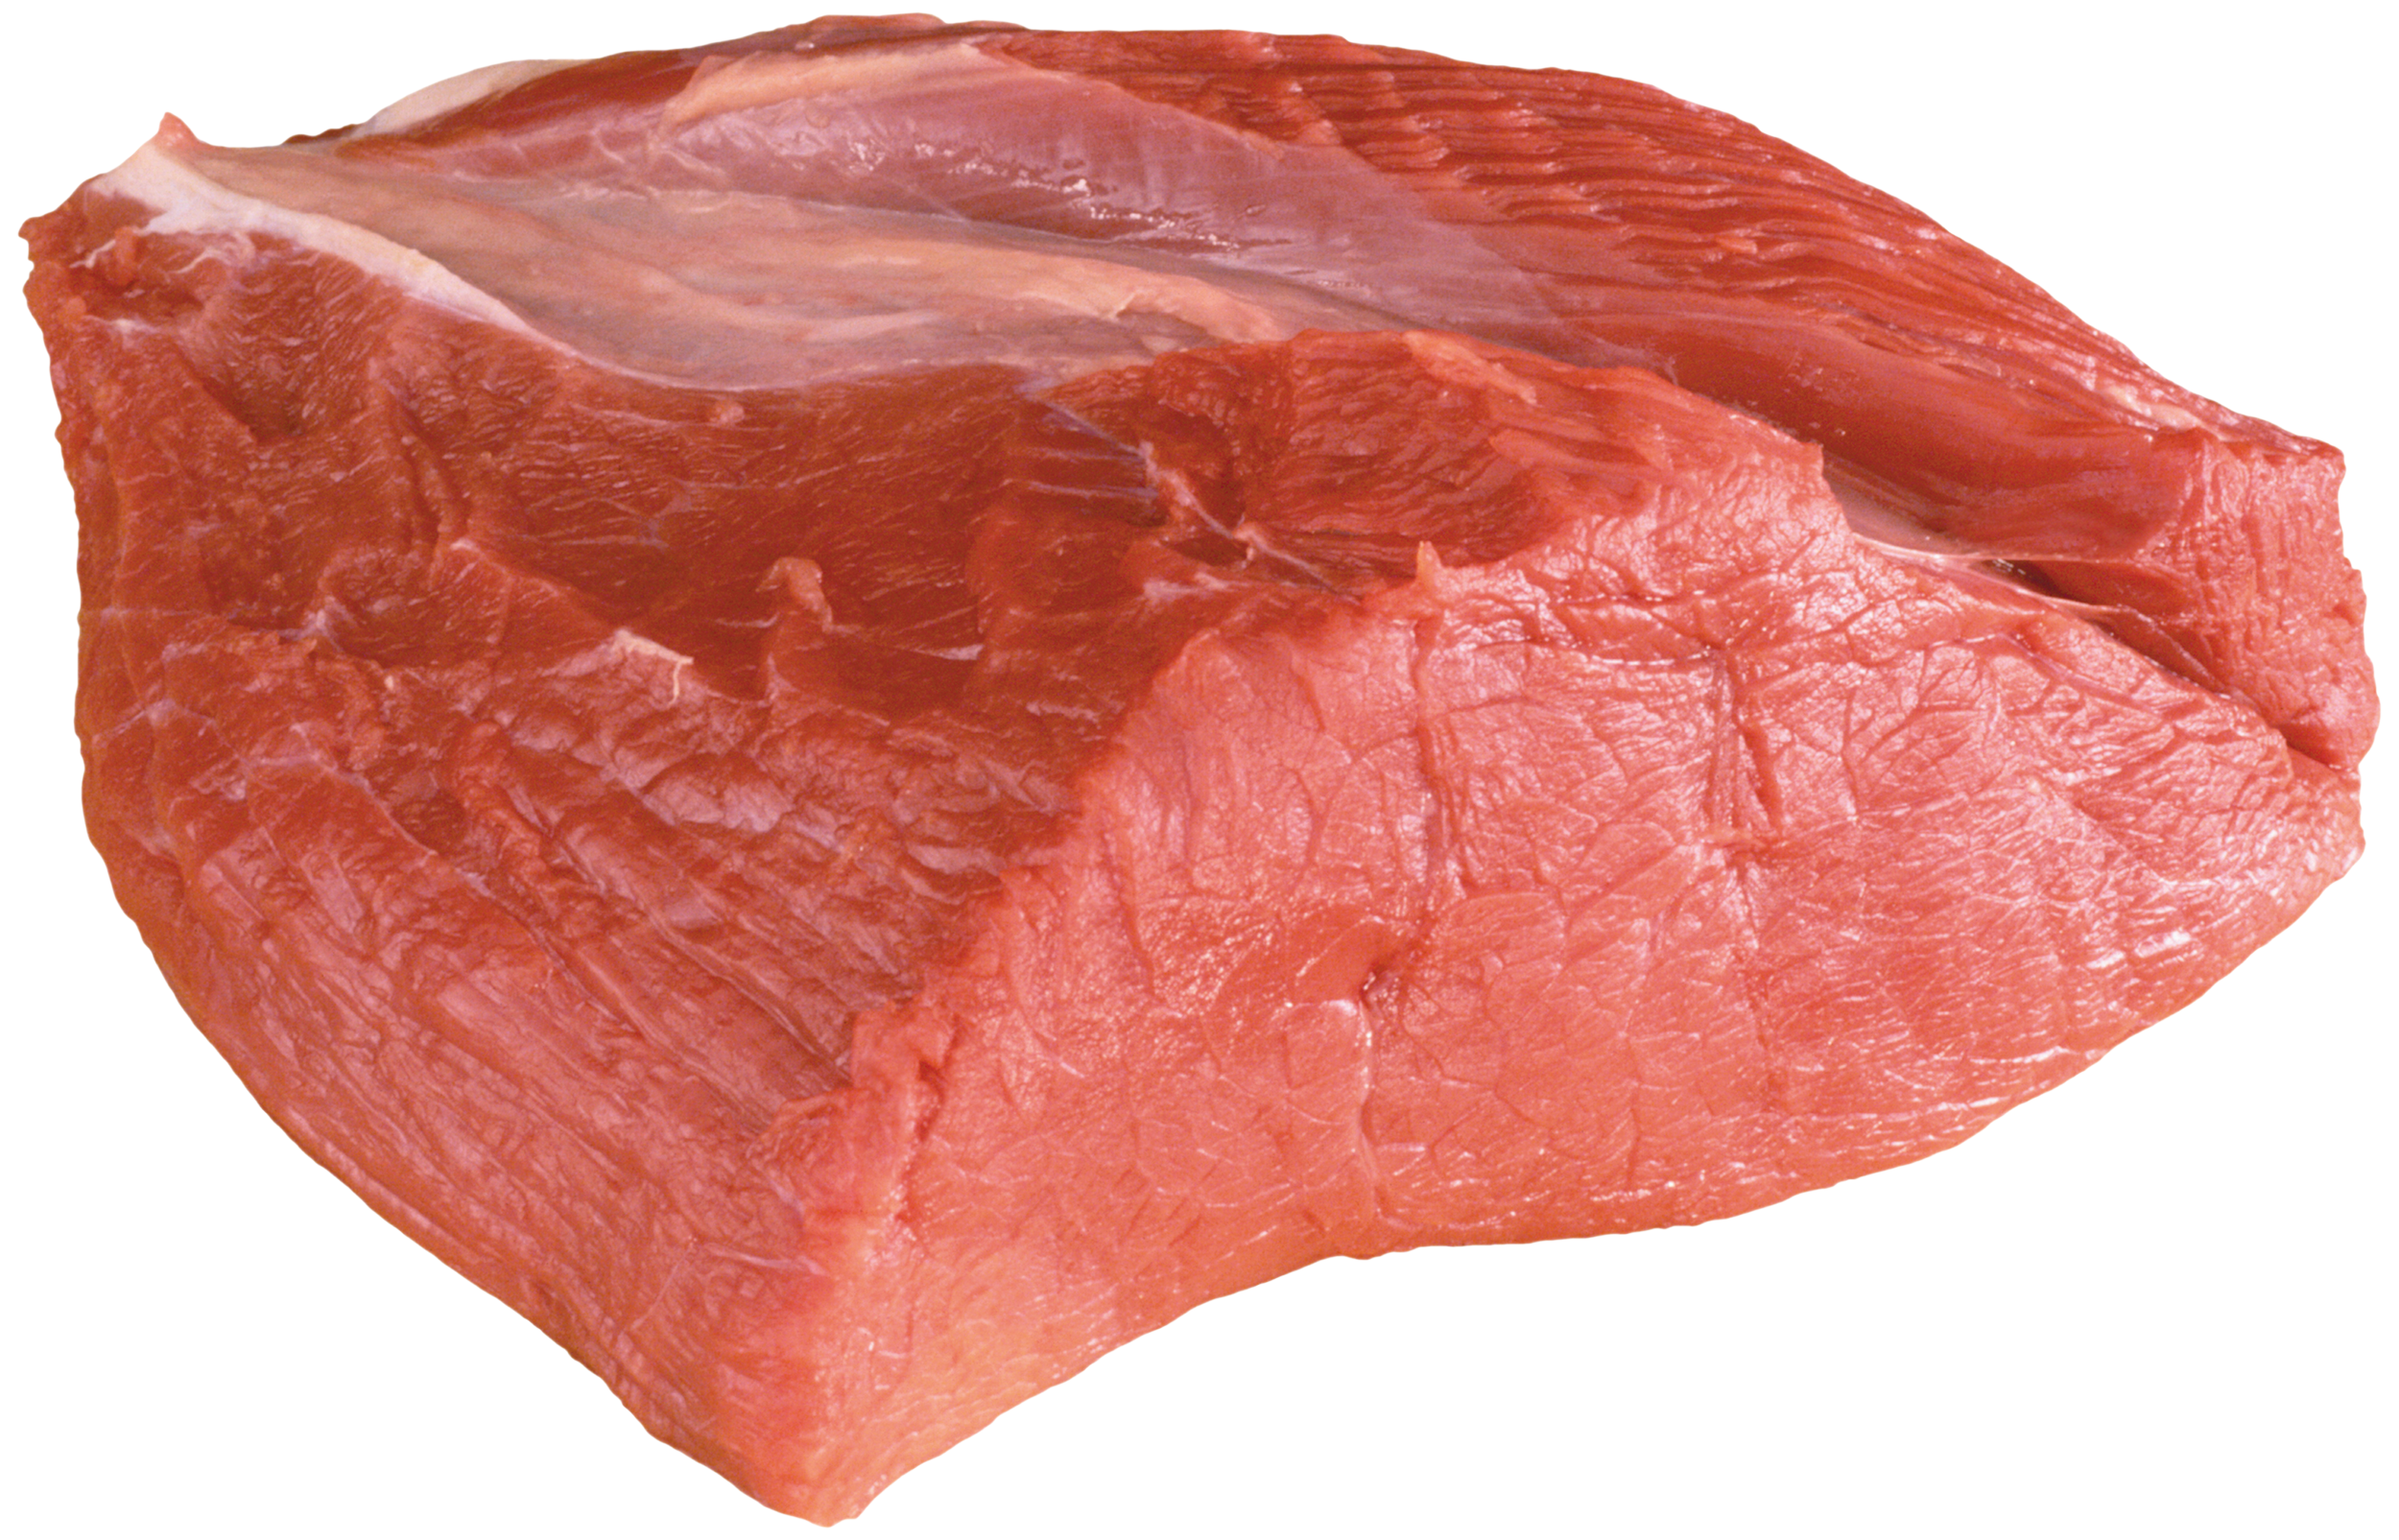 beef clipart raw meat